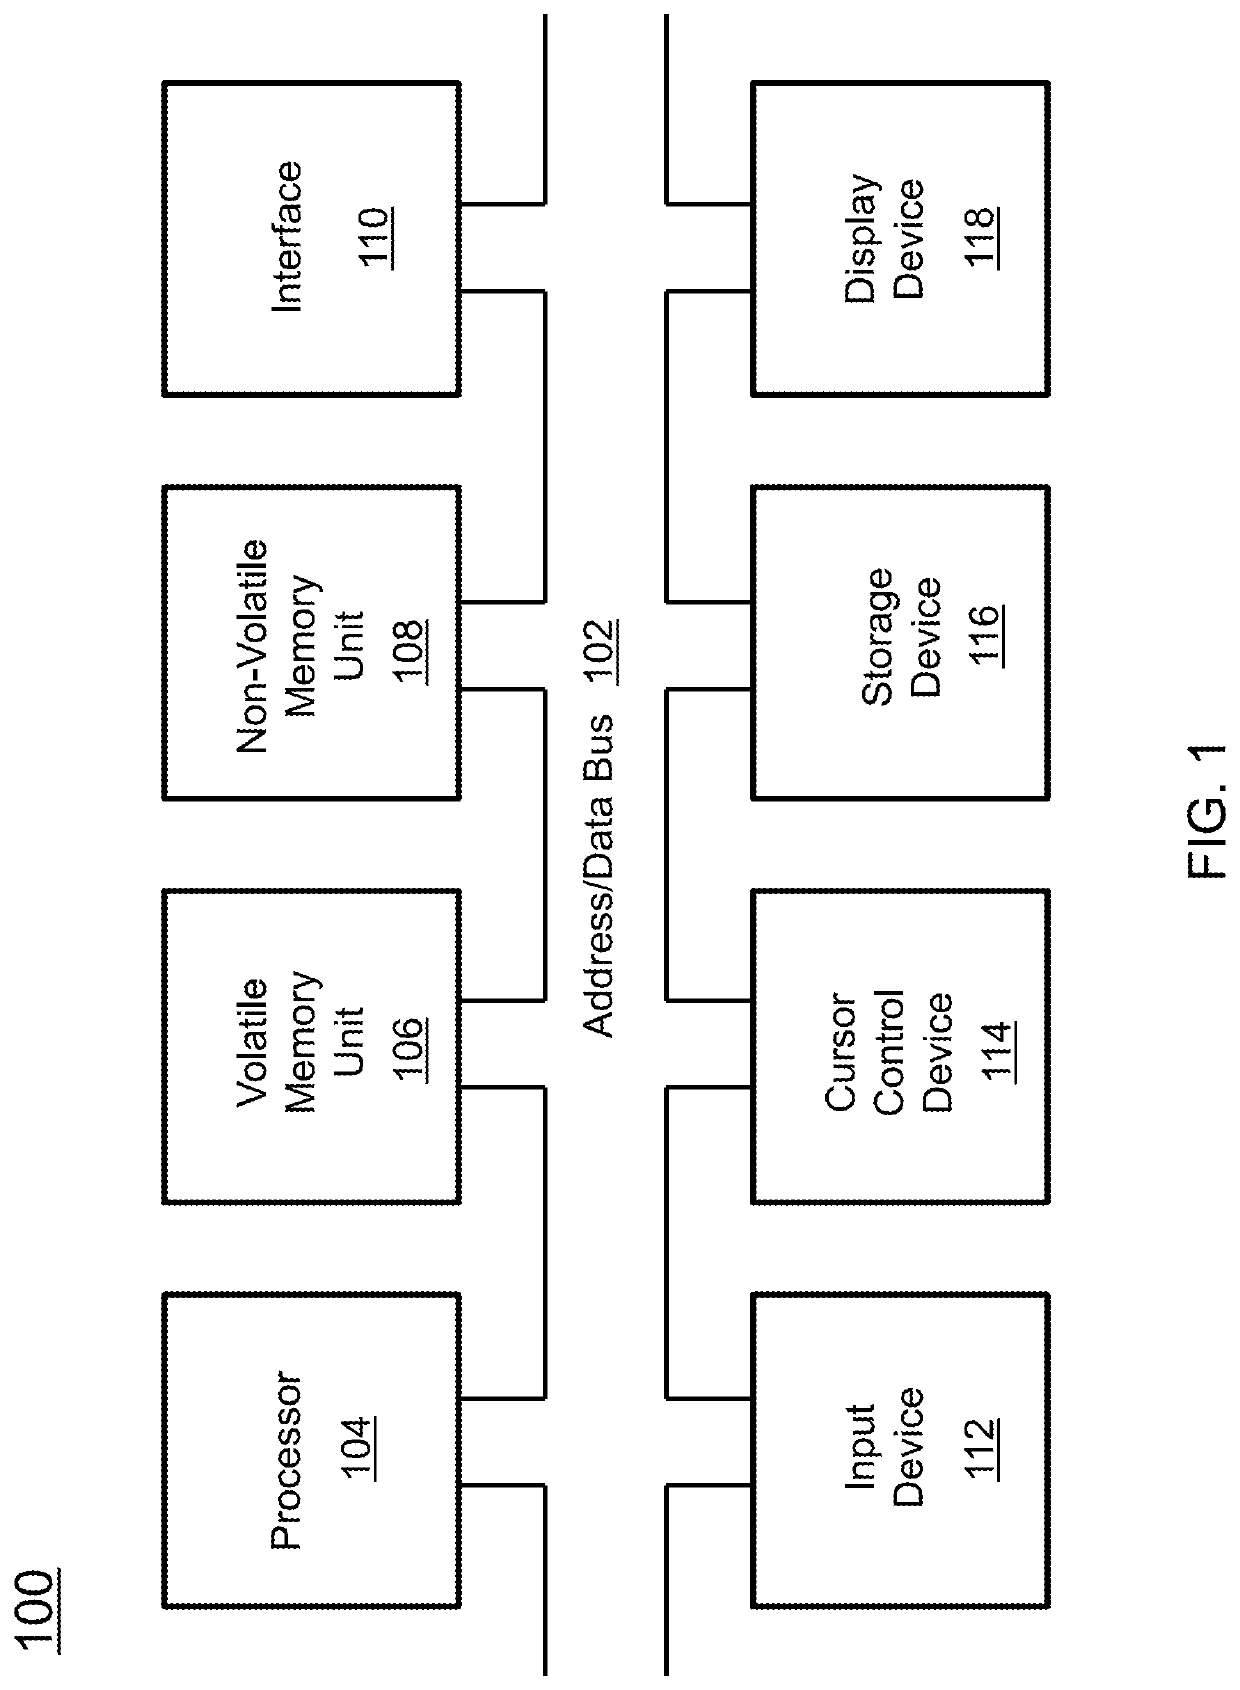 System and method to cue specific memory recalls while awake